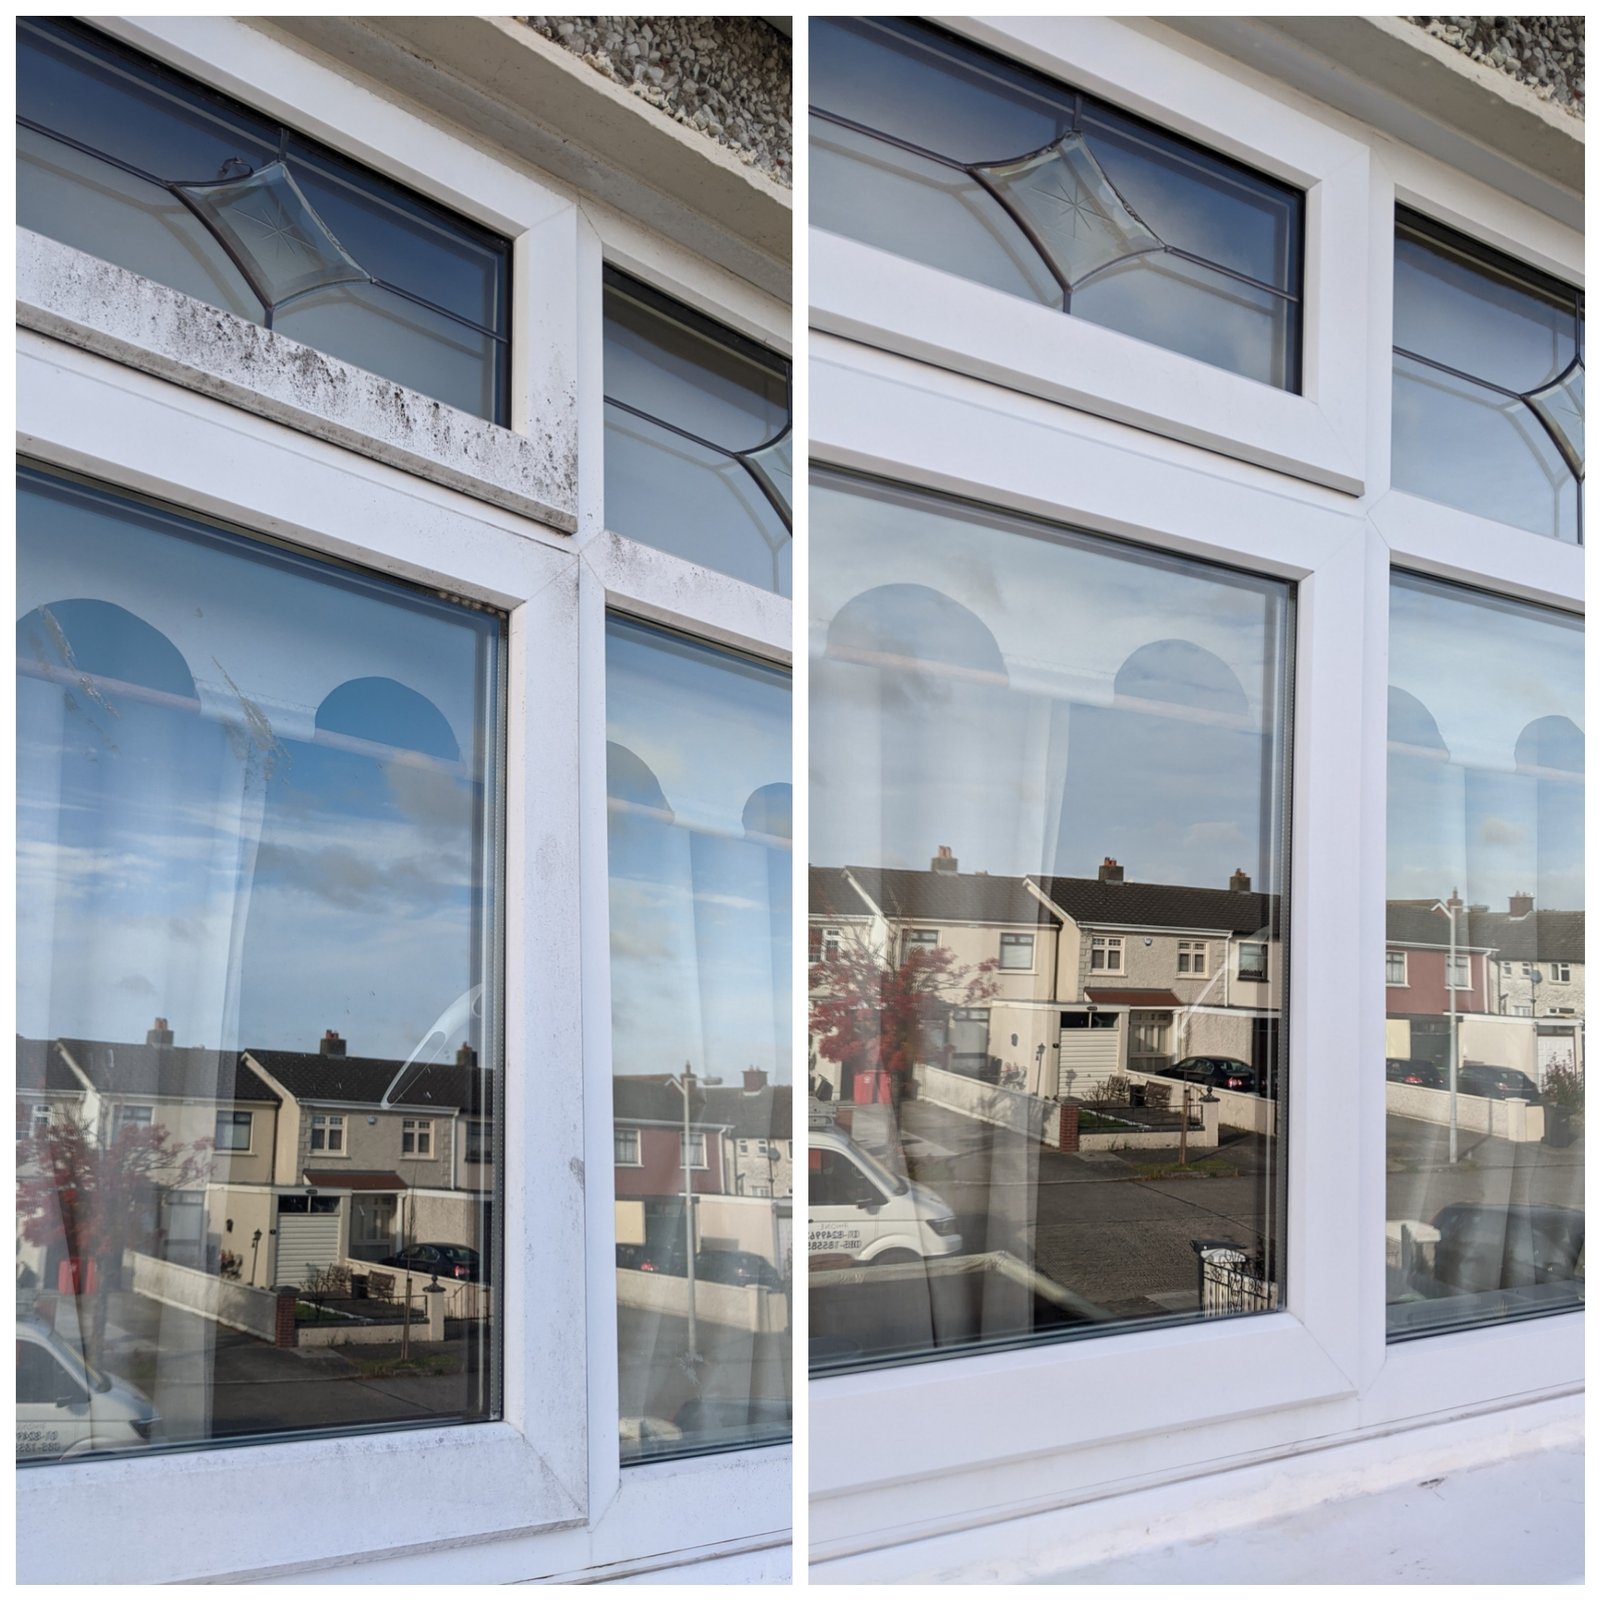 Through the Looking Glass: Commercial Window Cleaning Insights